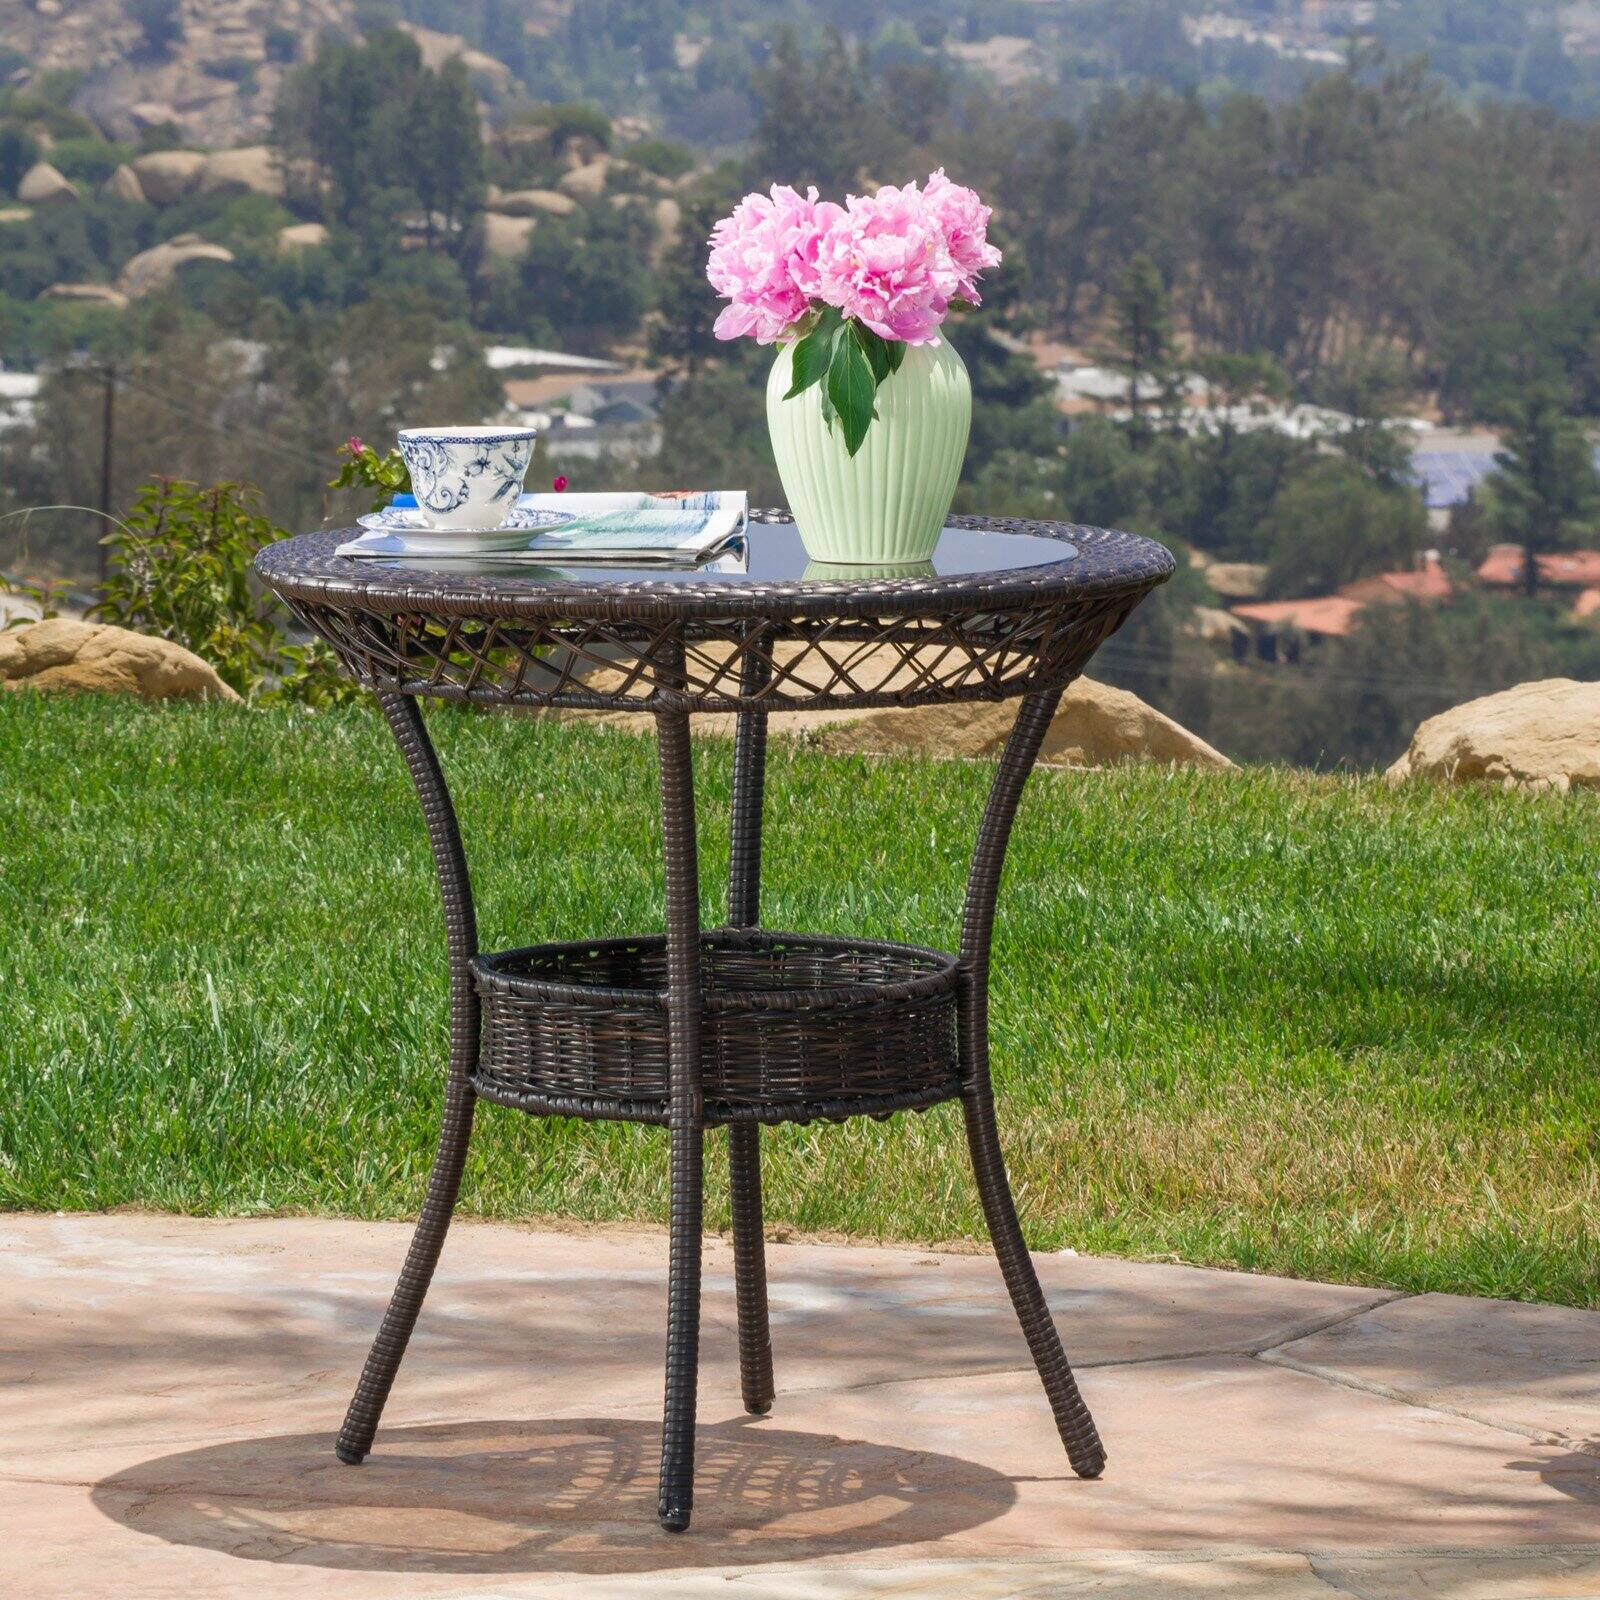 Figi Brown Outdoor Table with Glass Top - image 1 of 4